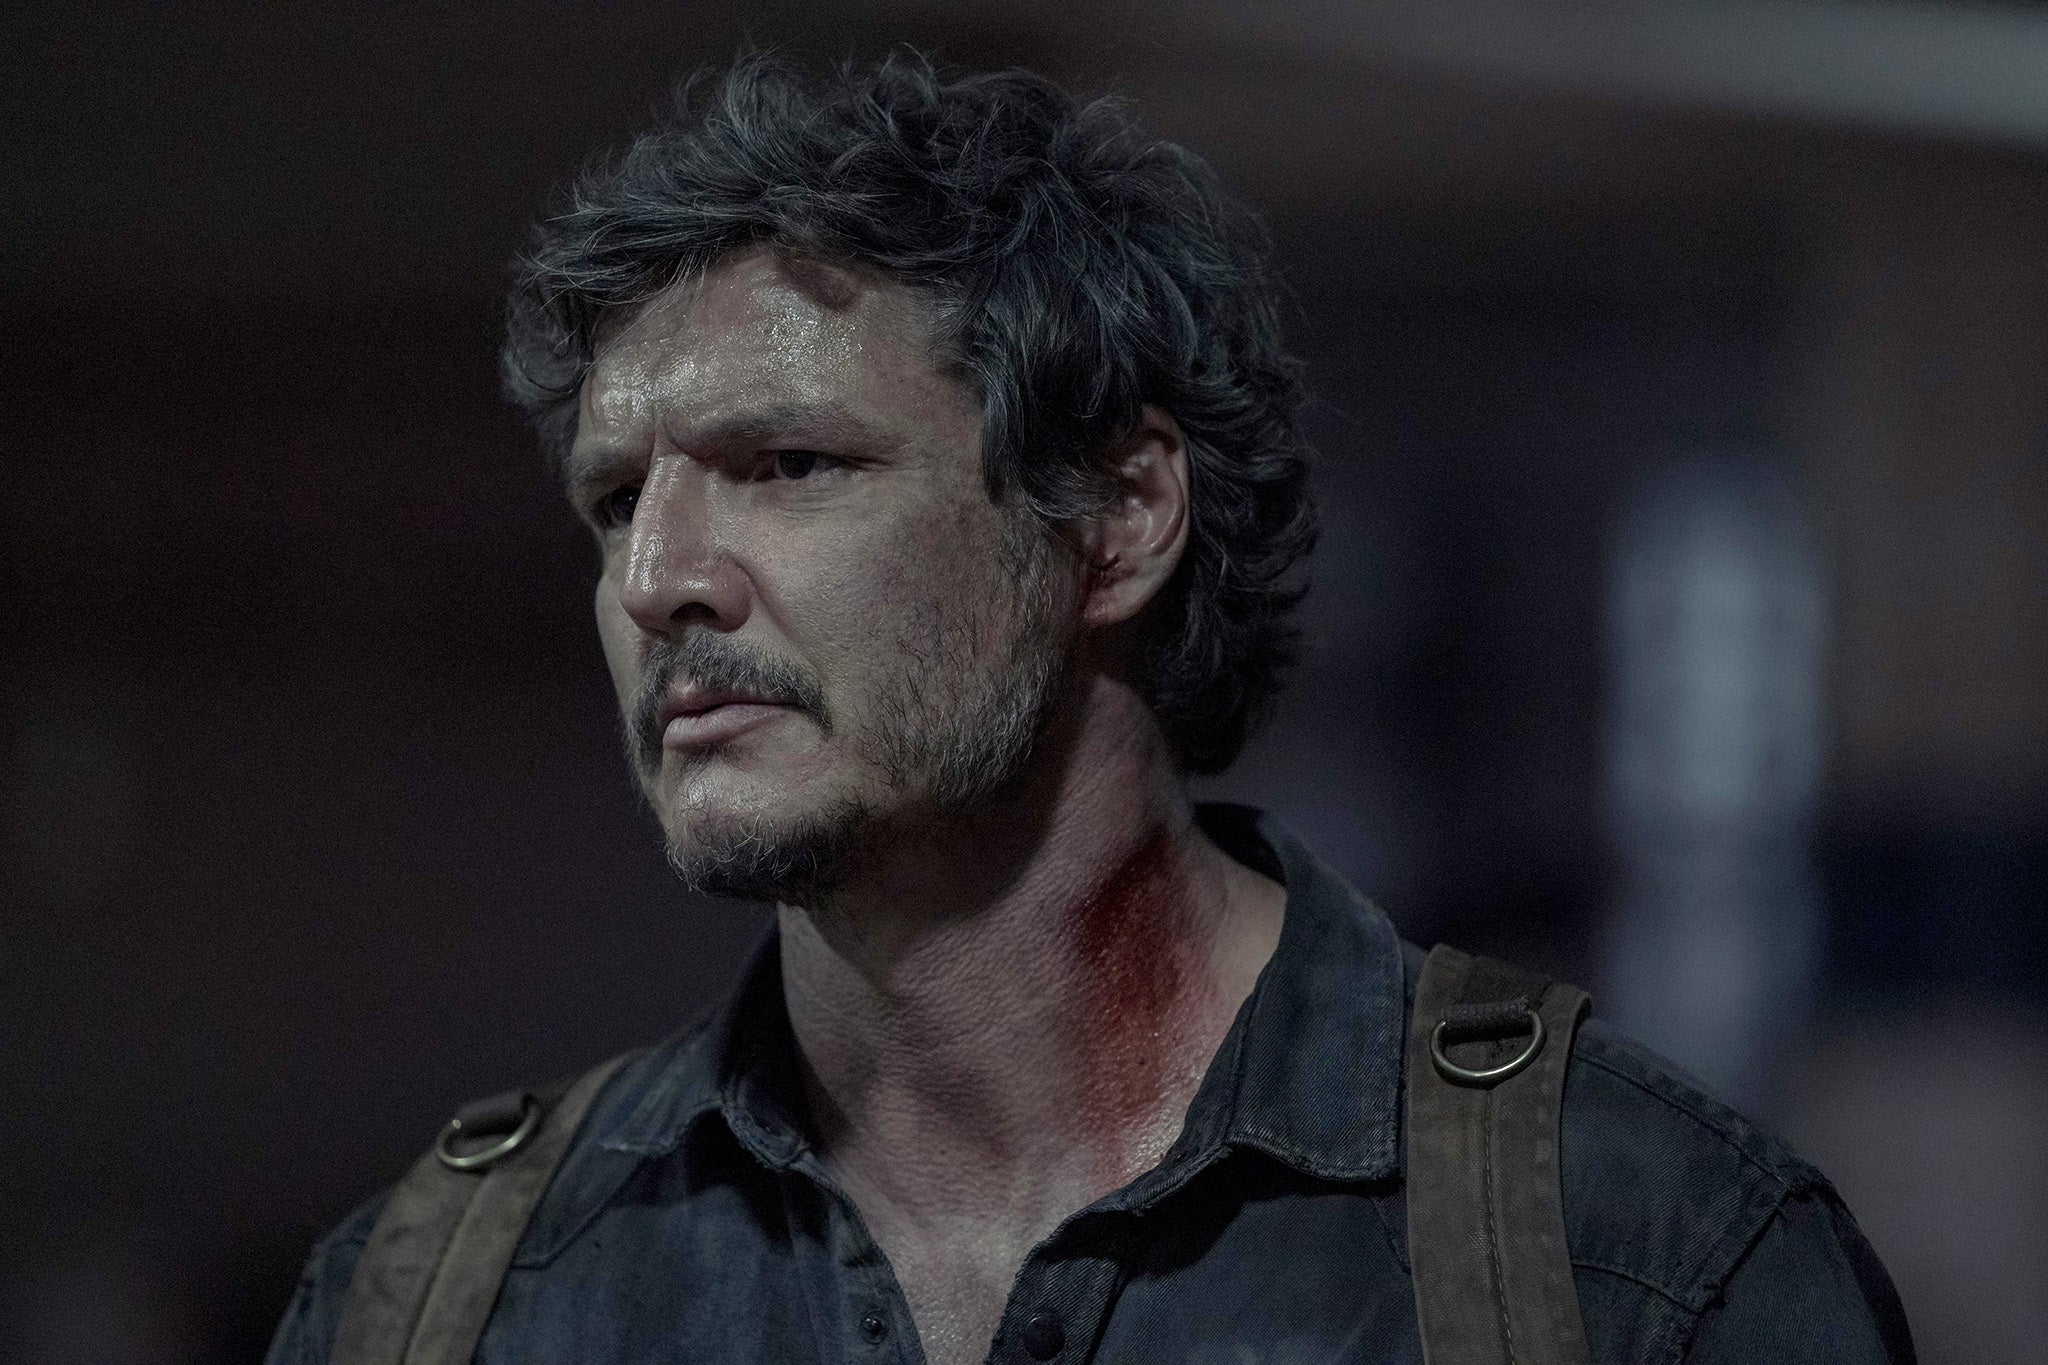 The best of them? Pedro Pascal could take home gold for ‘The Last of Us’